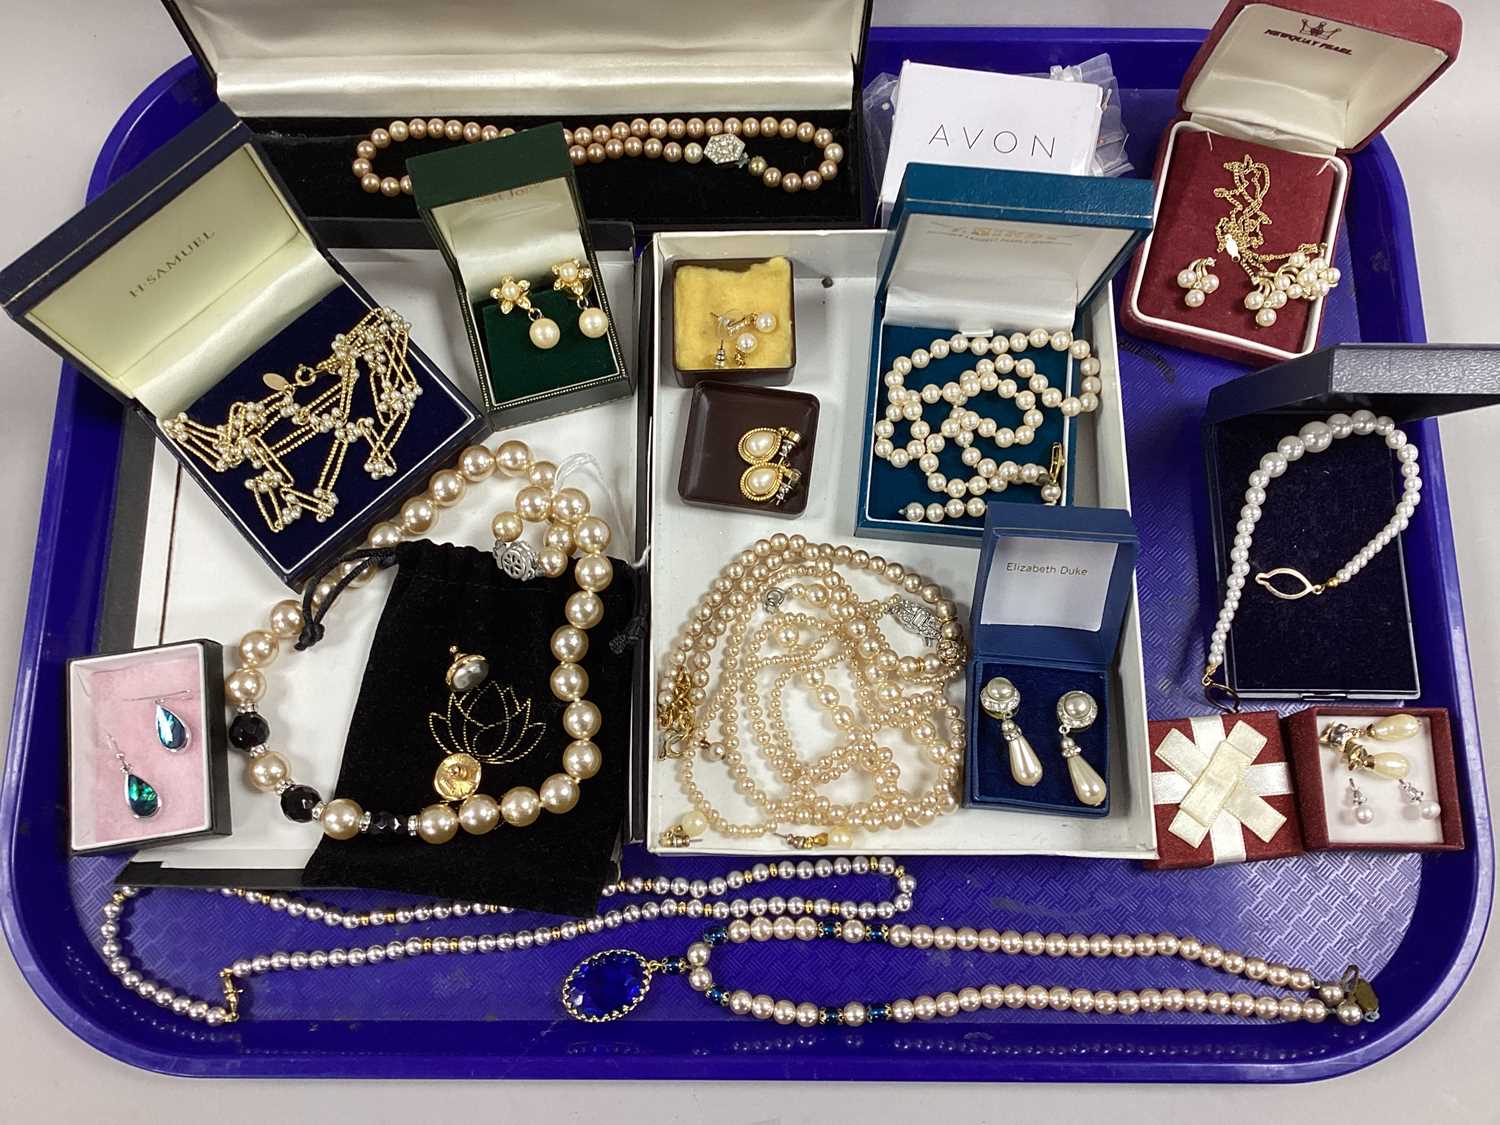 A Mixed Lot of Assorted Imitation Pearl Costume Jewellery, including earrings, necklaces, etc :- One